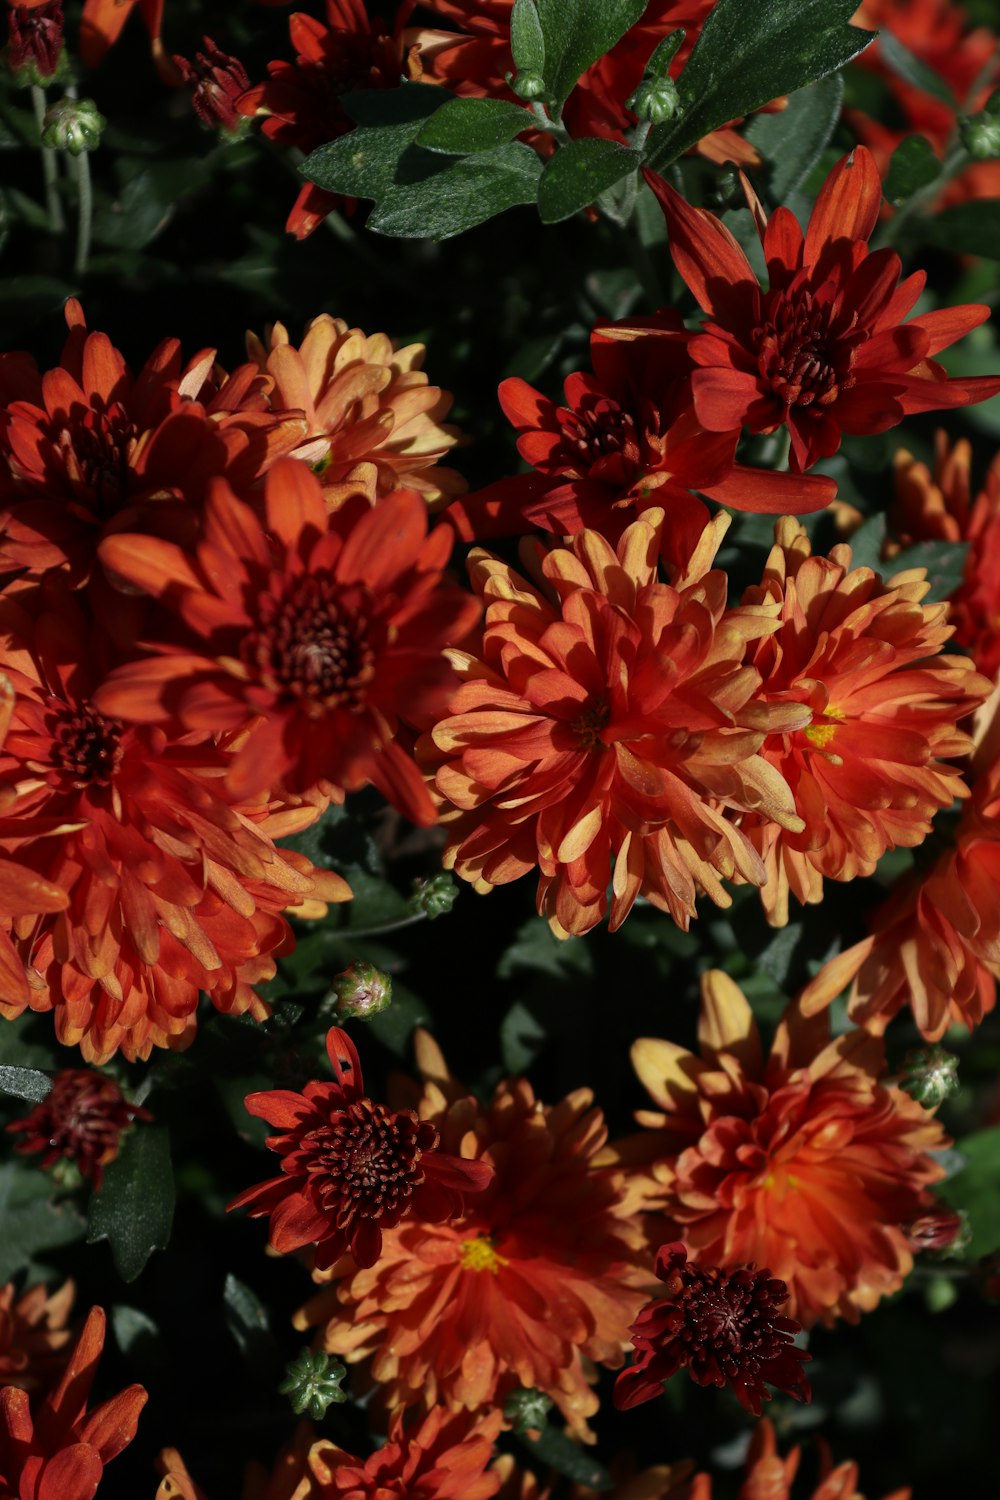 a close up of a bunch of red and yellow flowers